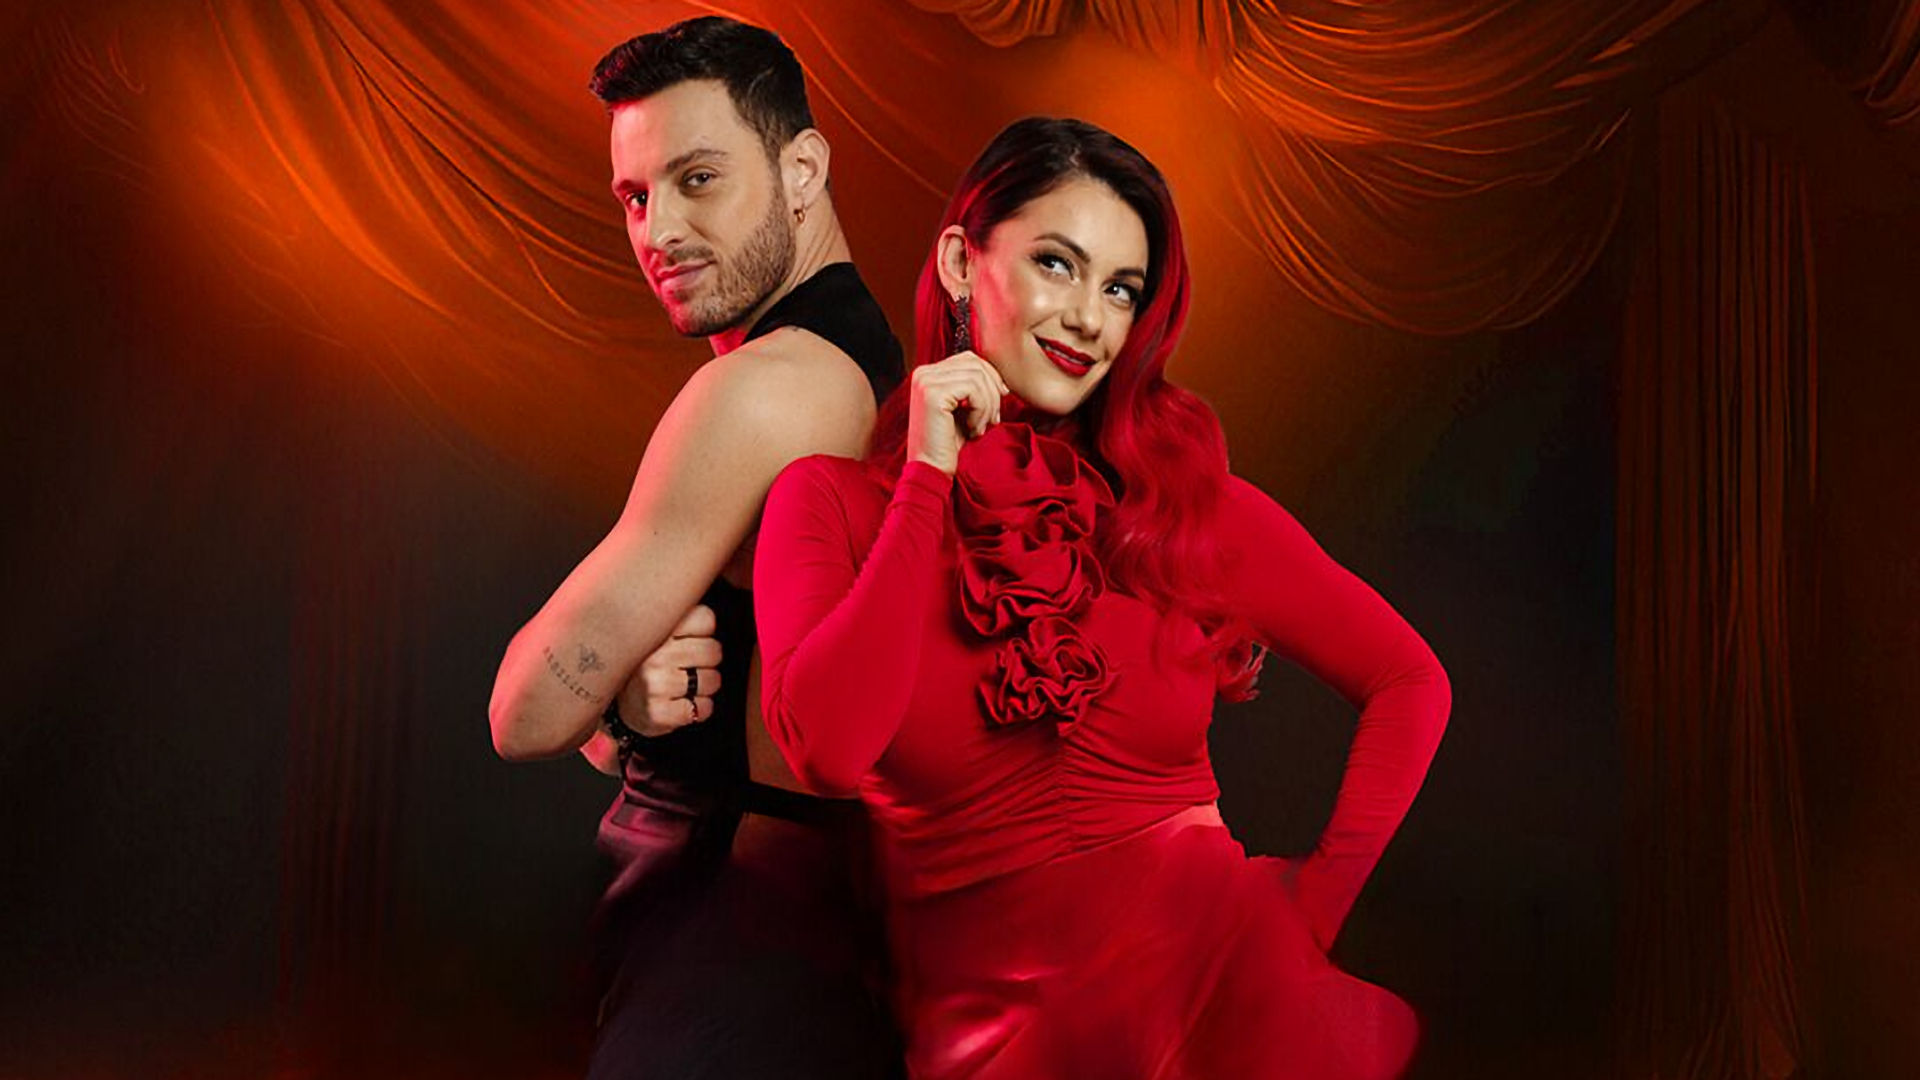 Burn The Floor with Dianne & Vito - Red Hot and Ready